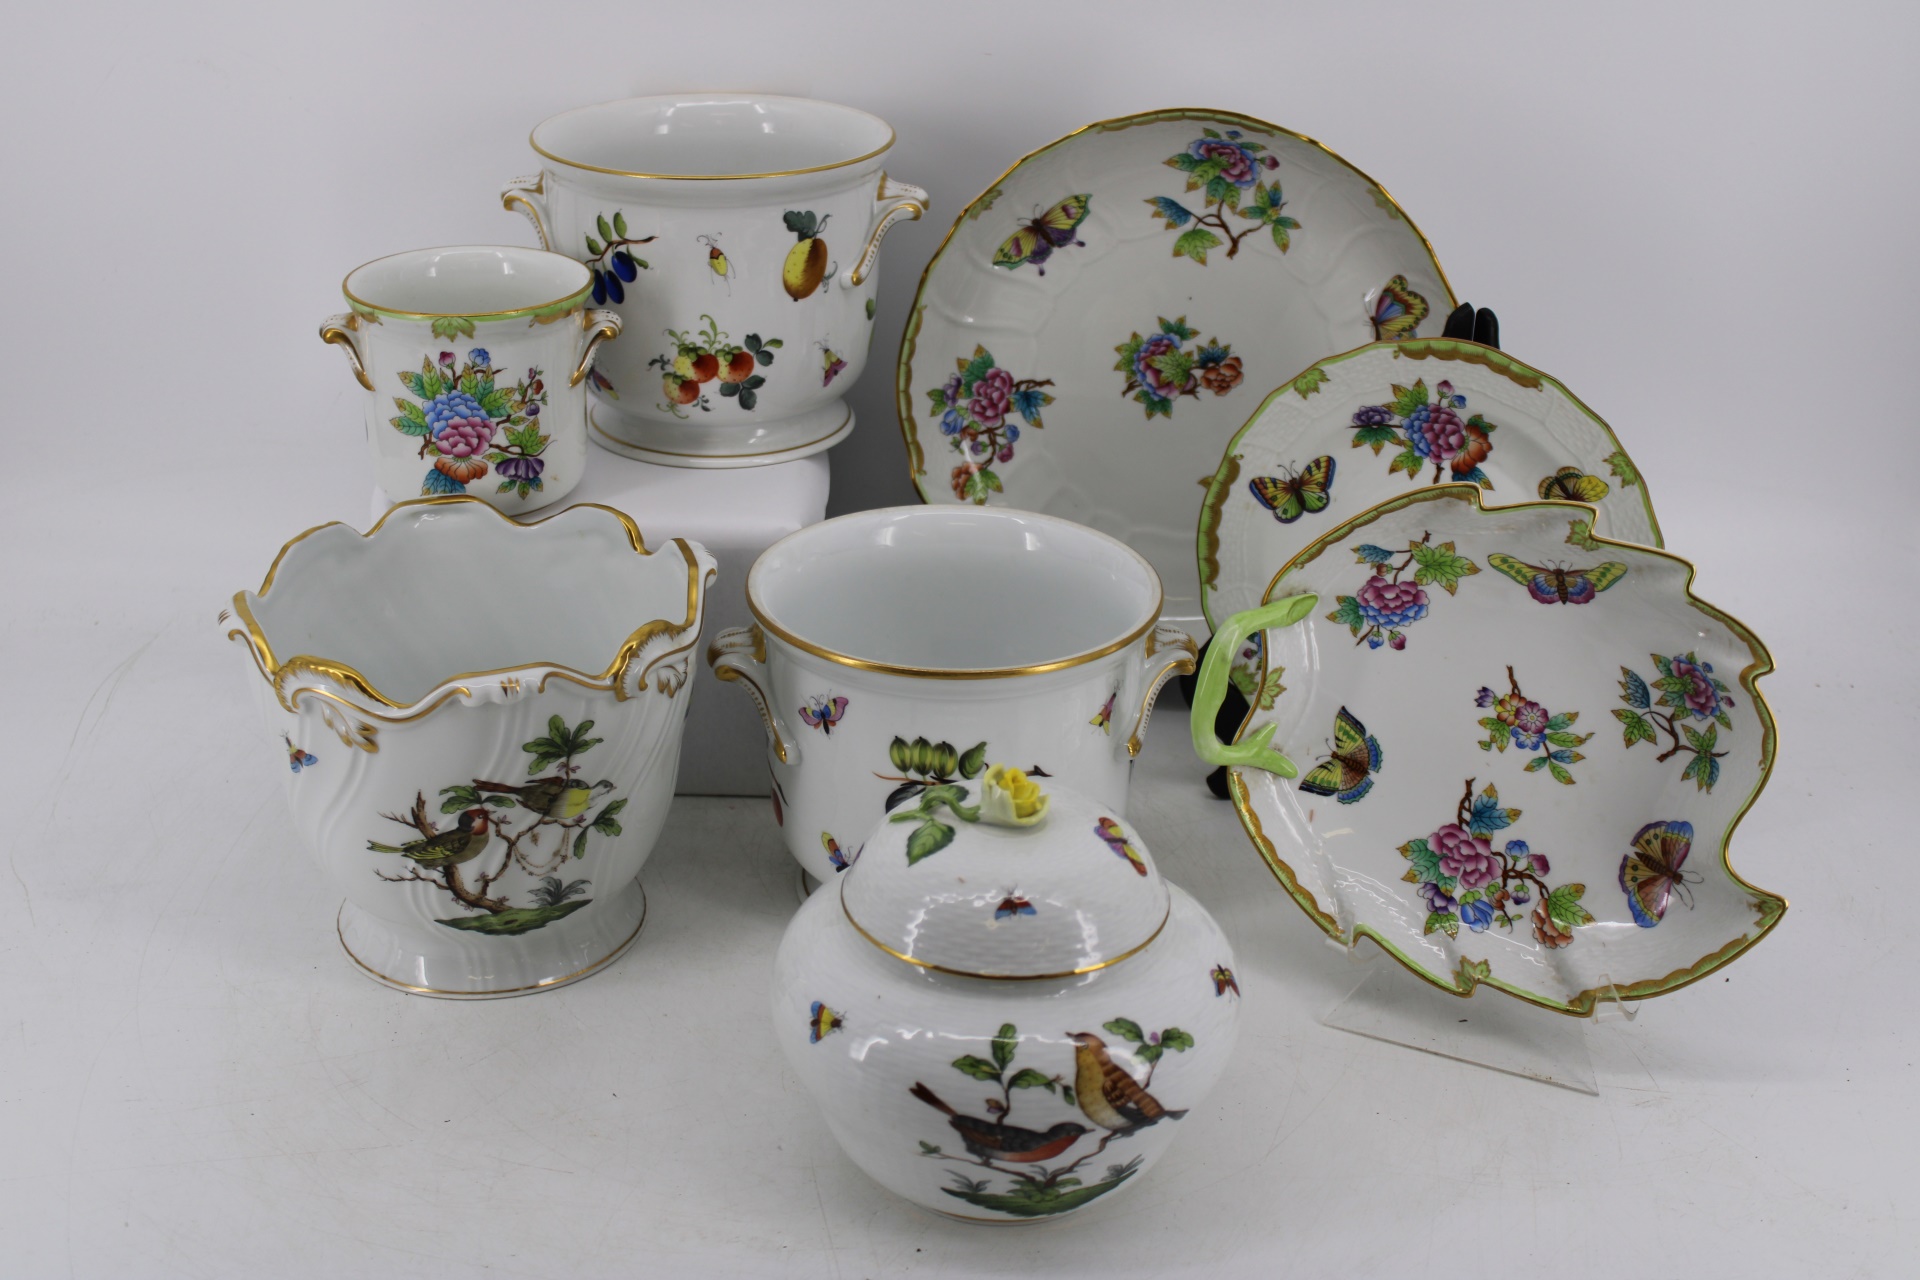 GROUPING OF HEREND PORCELAIN included